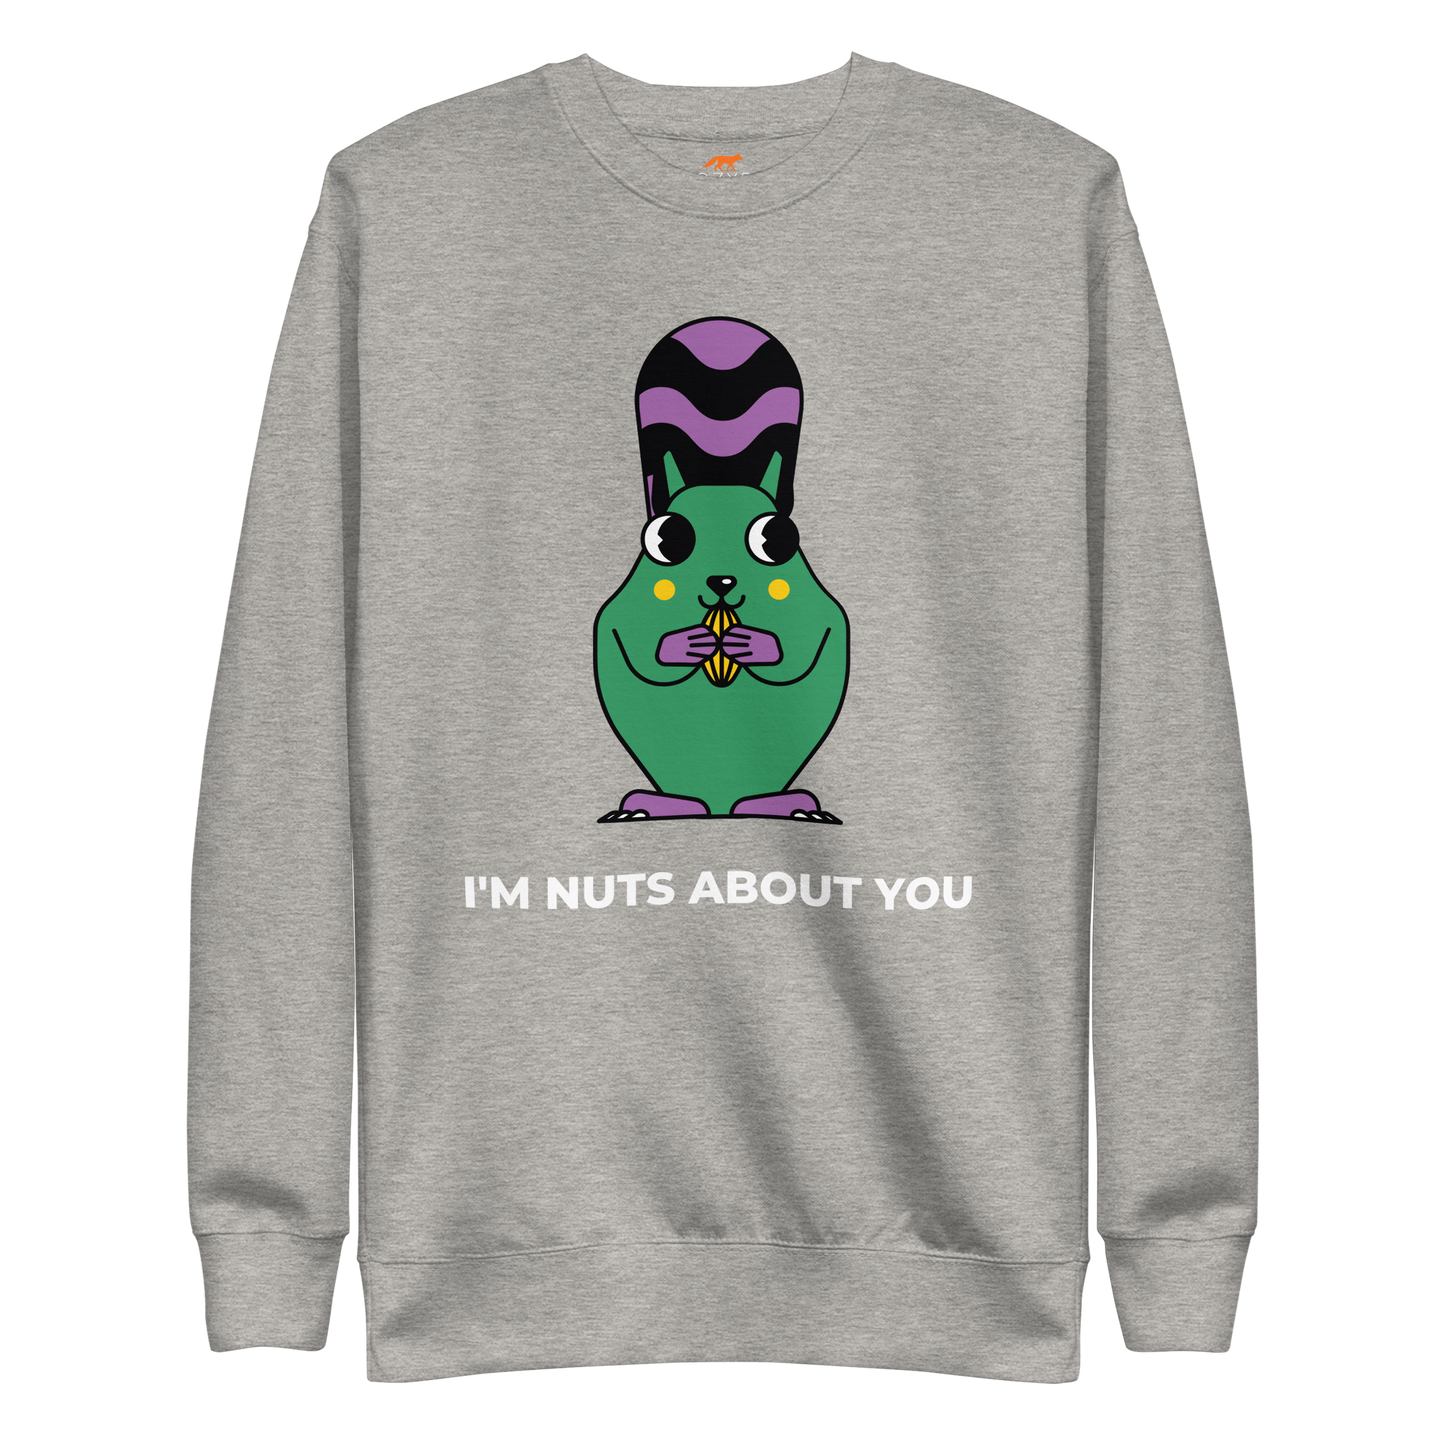 Carbon Grey Premium Squirrel Sweatshirt featuring a hilarious I'm Nuts About You graphic on the chest - Funny Graphic Squirrel Sweatshirts - Boozy Fox